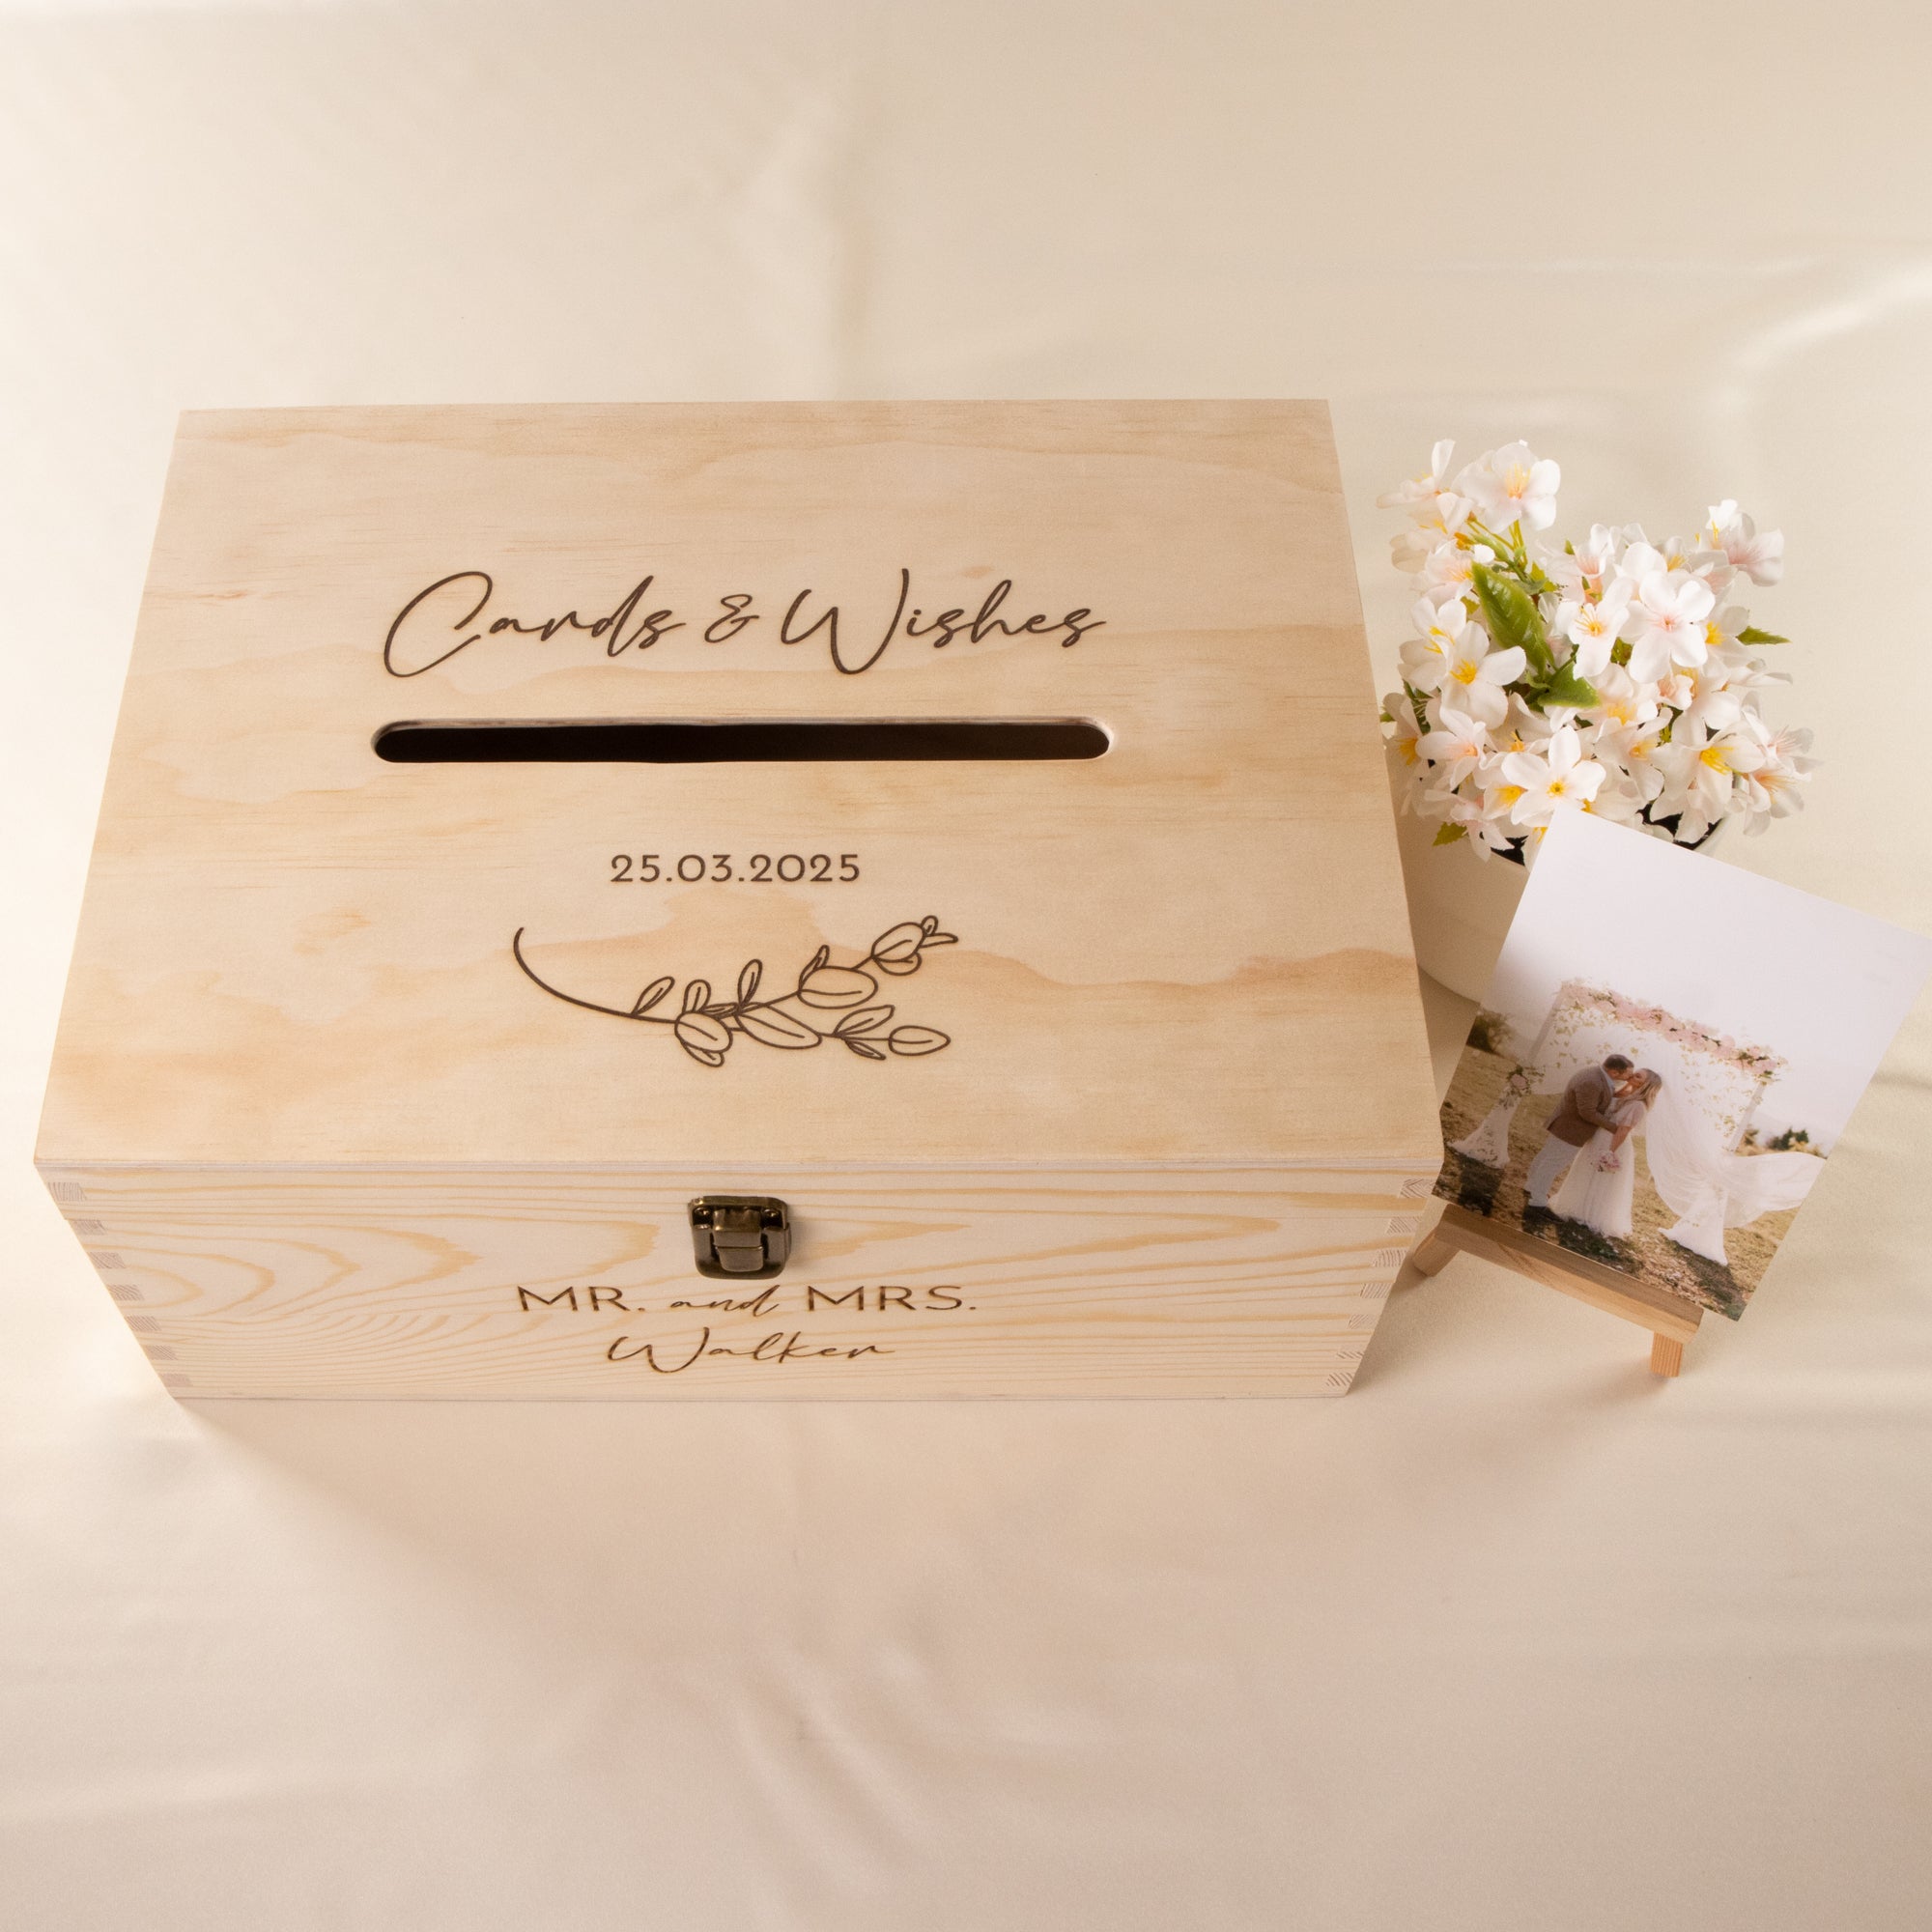 Wooden Wishing Well Box for weddings. With its unique Advice & Cards Keepsake, charming keepsake and a cherished Wedding Memory Box